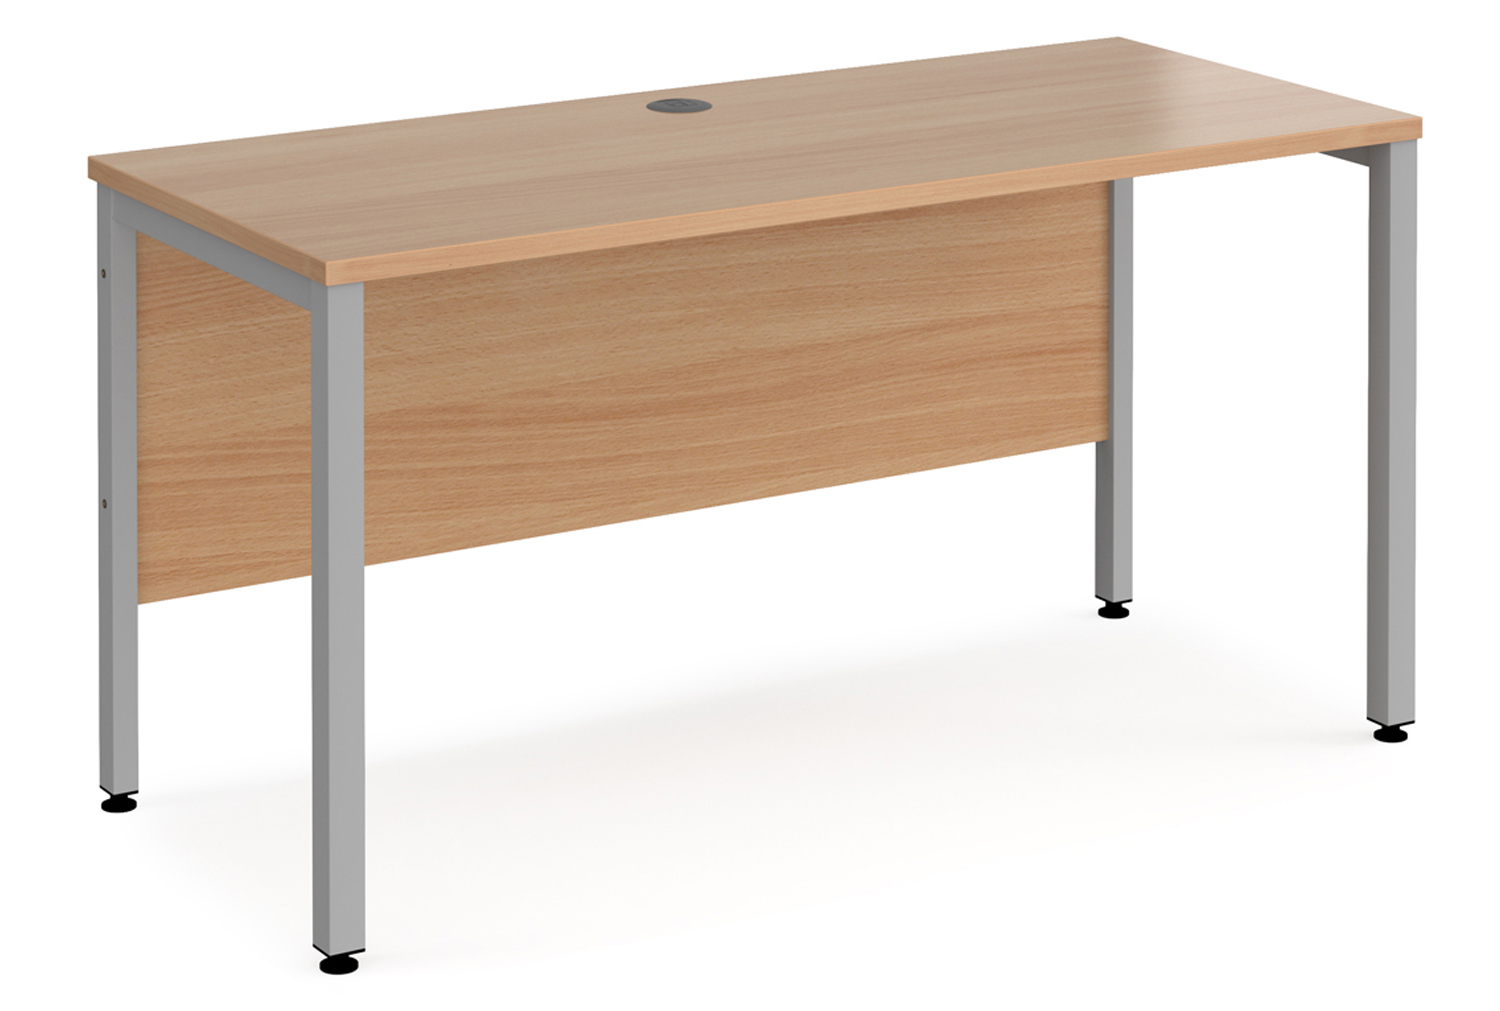 Value Line Deluxe Bench Narrow Rectangular Office Desks (Silver Legs), 140wx60dx73h (cm), Beech, Express Delivery